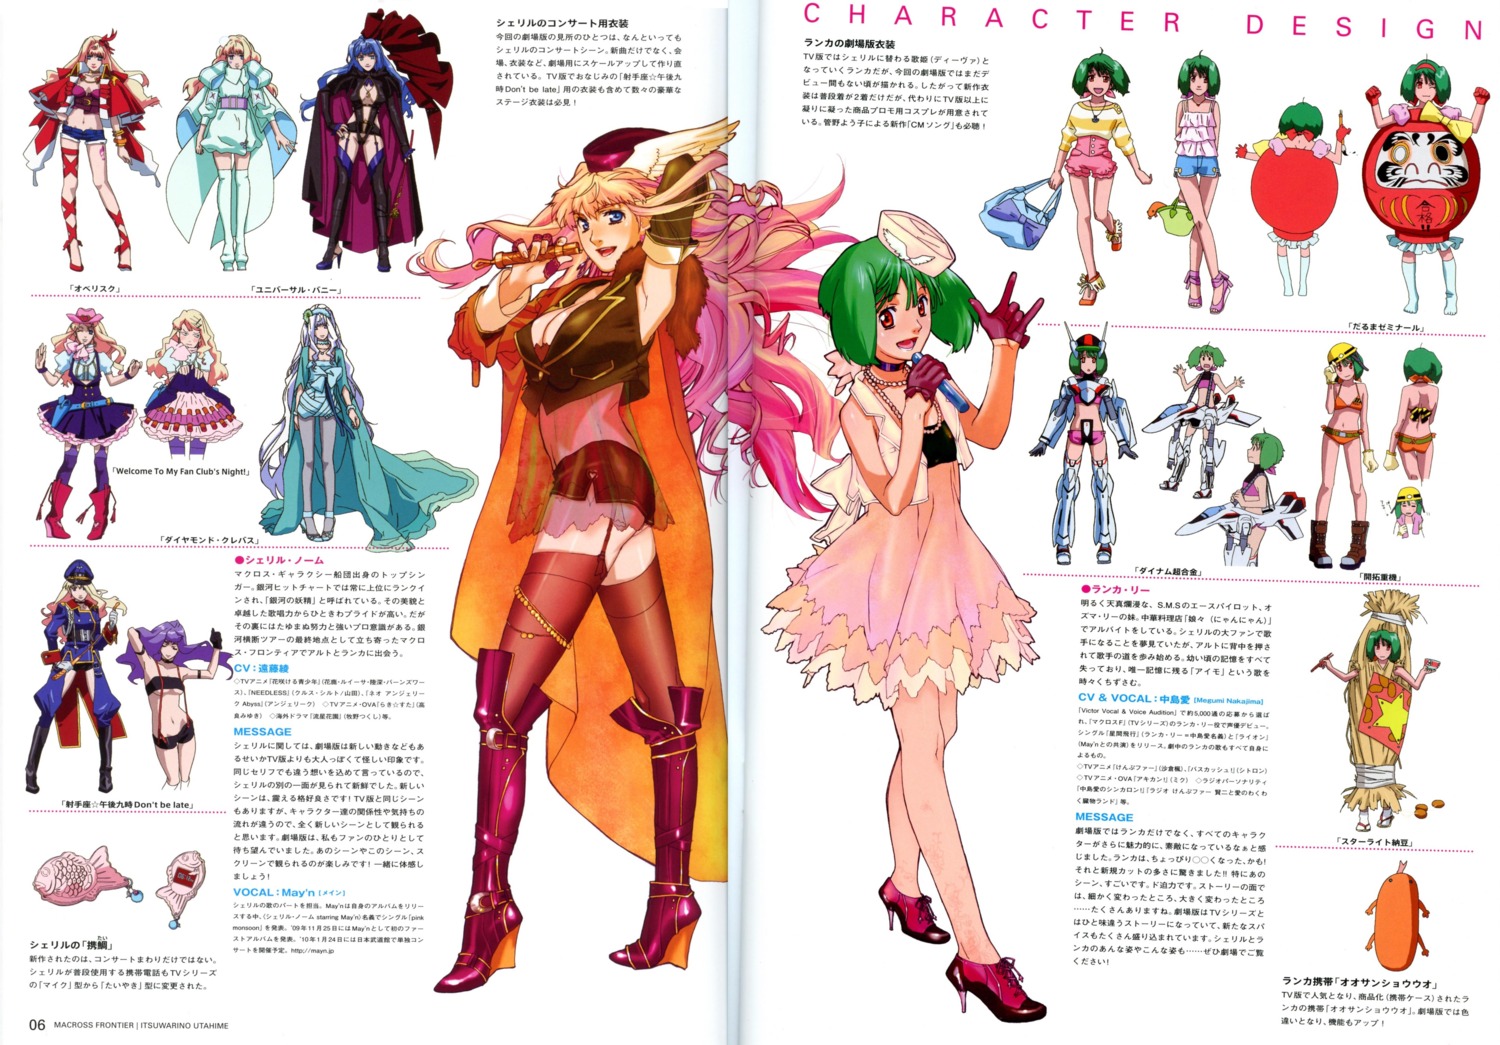 binding_discoloration character_design cleavage crease dress macross macross_frontier ranka_lee sheryl_nome thighhighs